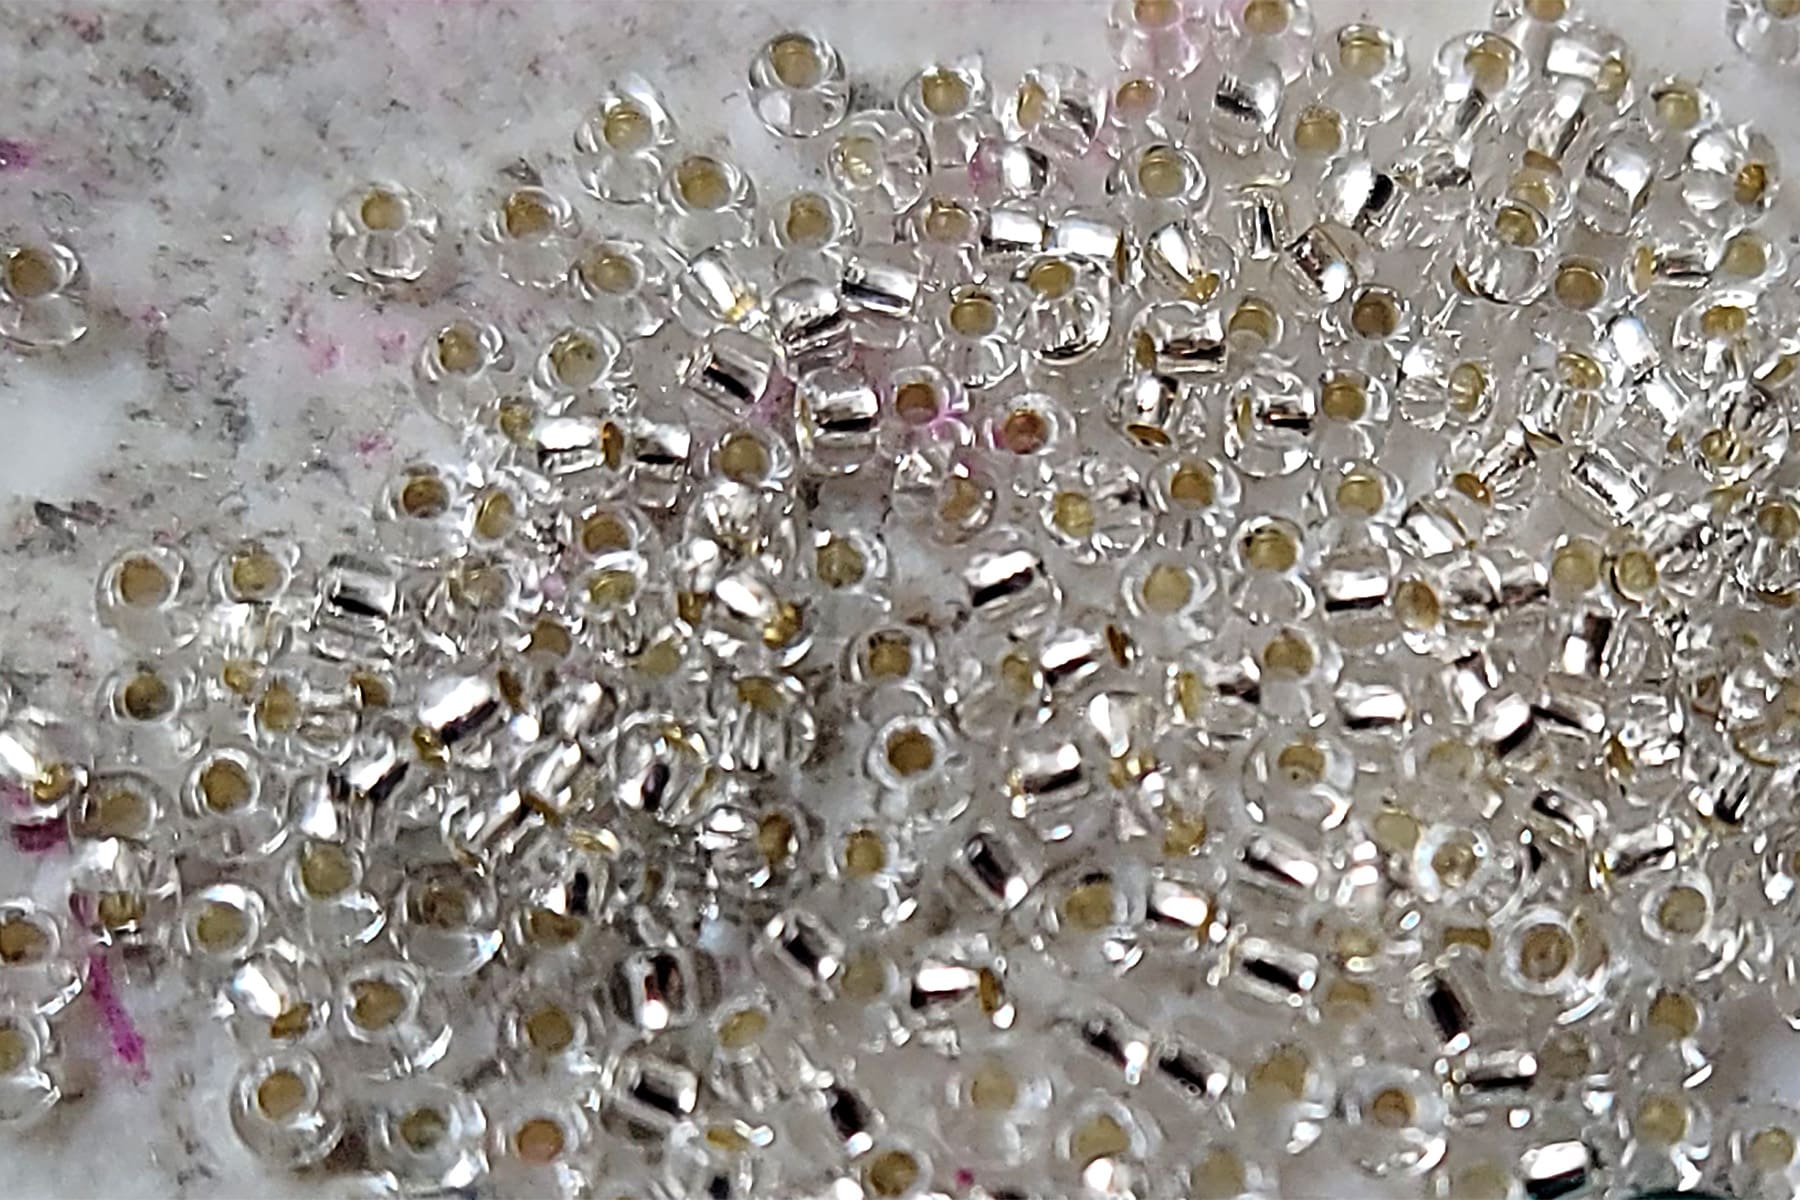 A very close up view of a pile of clear seed beads.